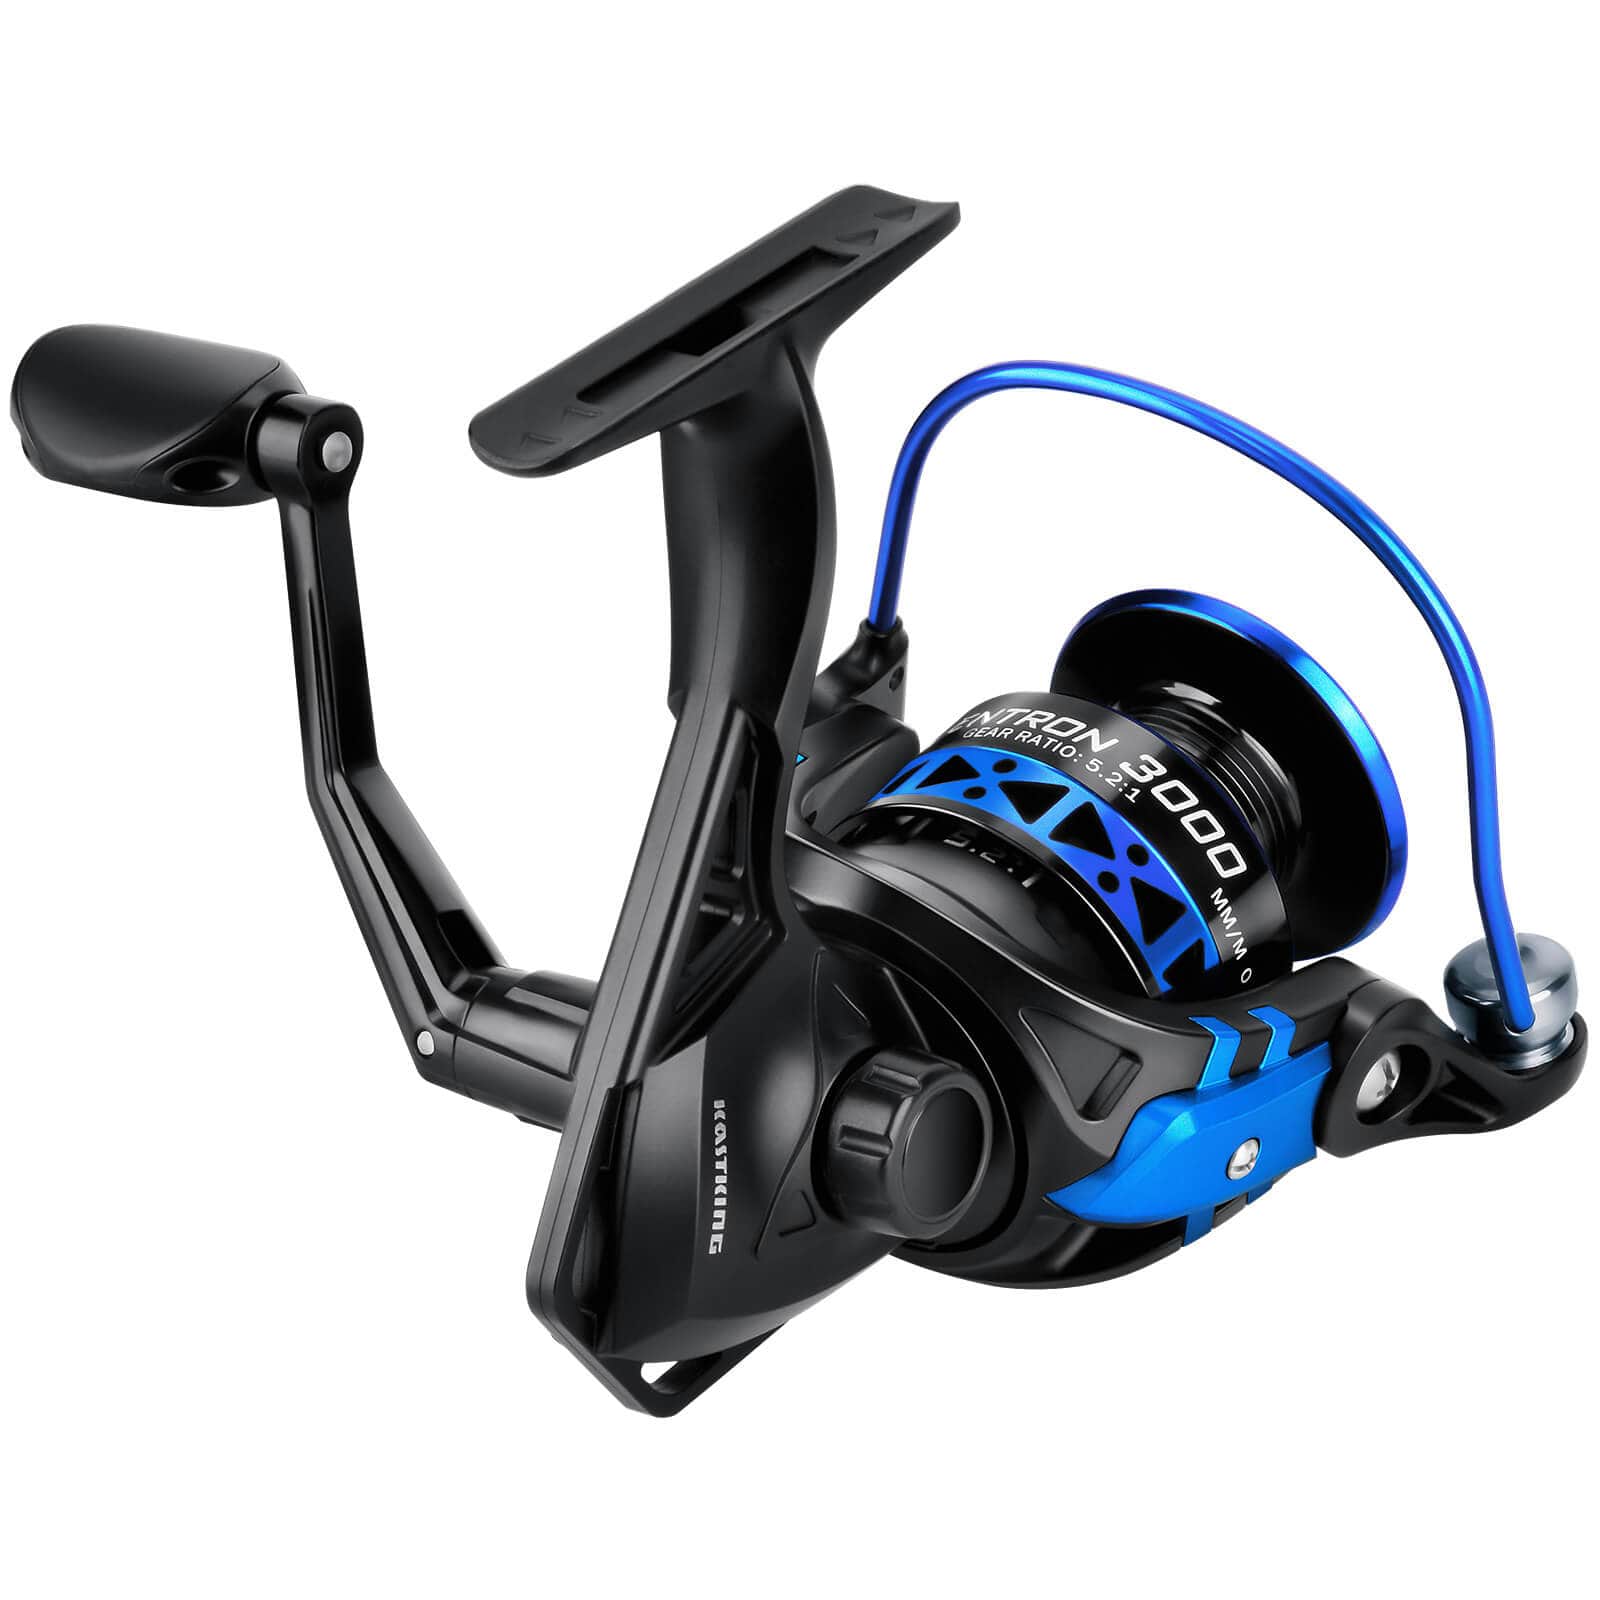 Kastking Summer And Centron Spinning Reels, 9+1 Bb Light Weight, Ultra  Smooth Powerful, Size 1000 Is Perfect For Ice Fishing / Ultralight